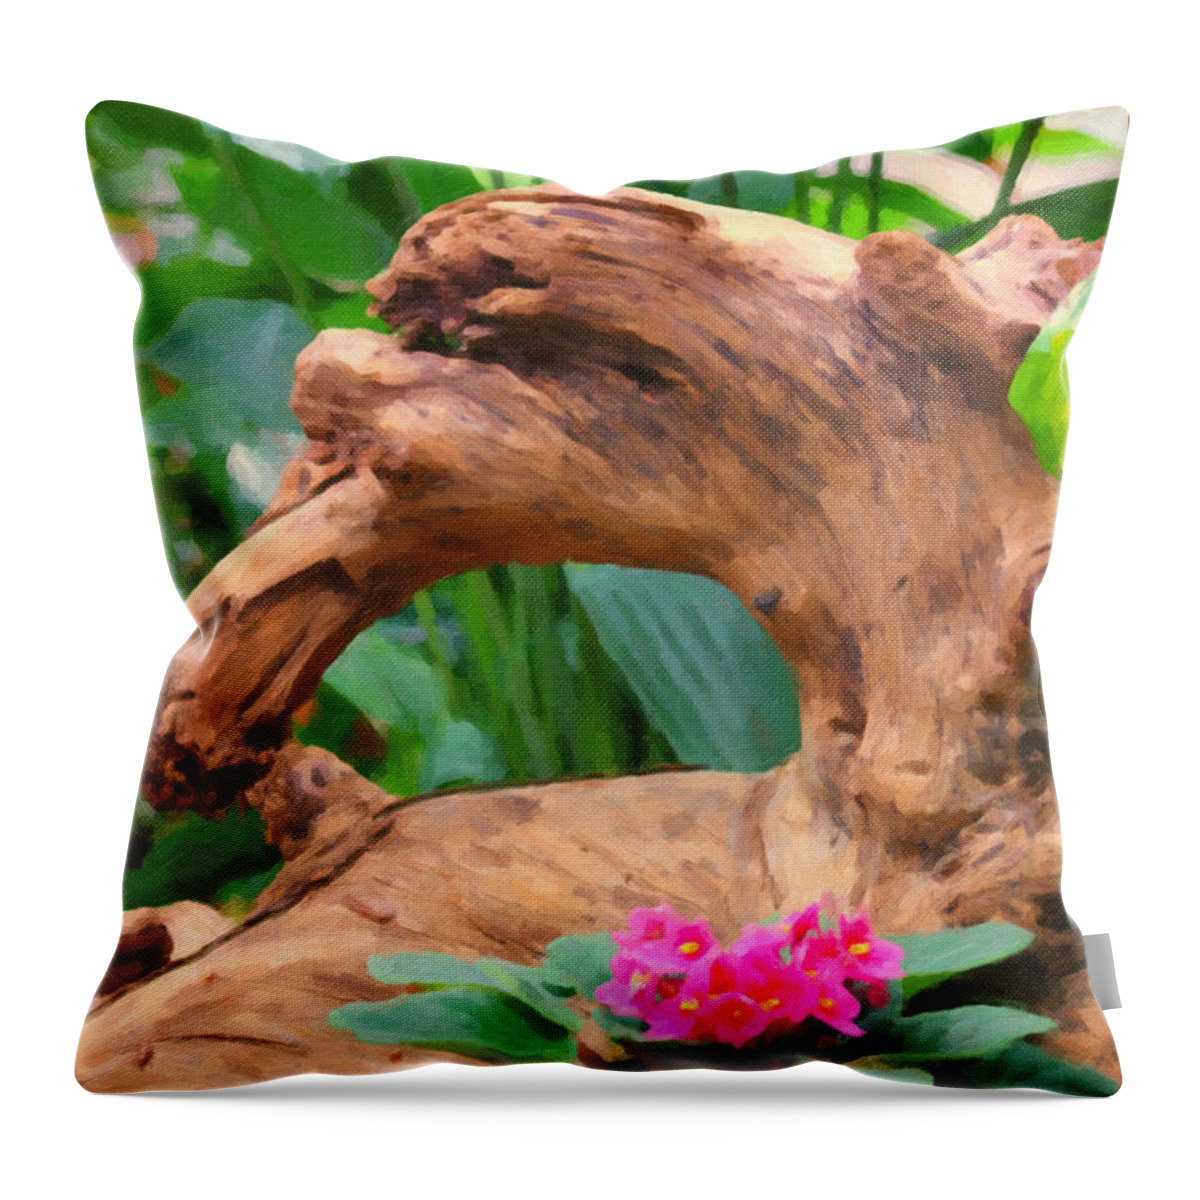 Country Throw Pillow featuring the photograph Nature Made by M Three Photos